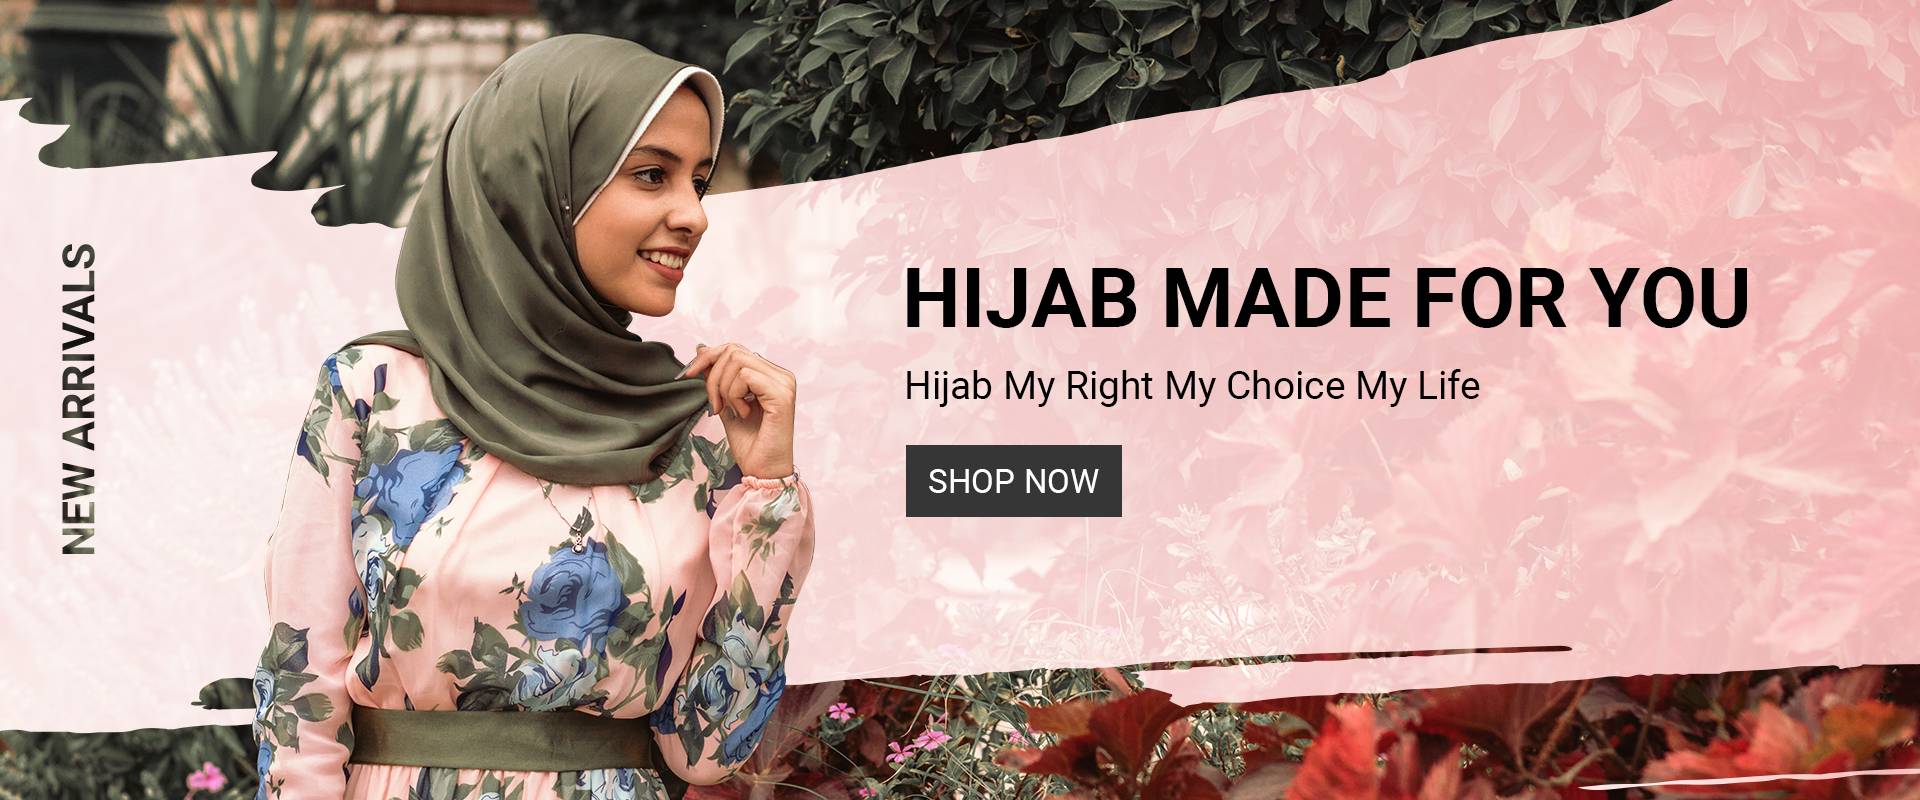 Hijab made for you